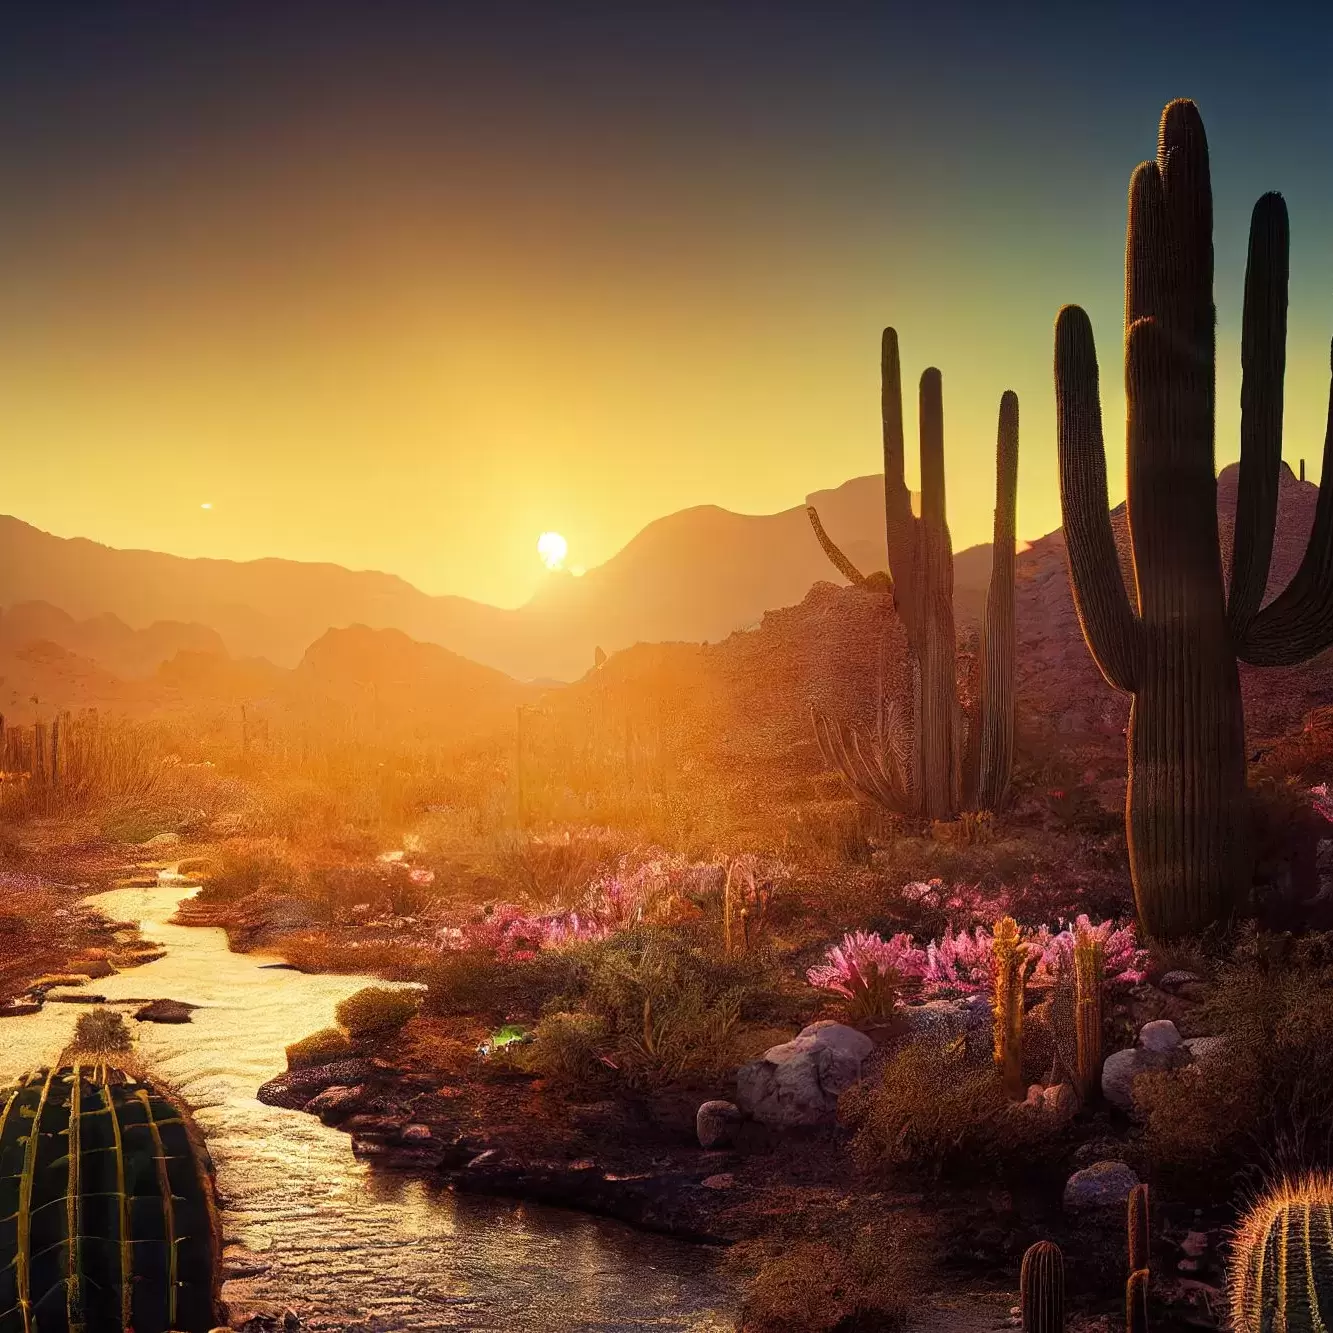 A sunset desertscape with saguaro and prickly pear cacti and a stream running through.